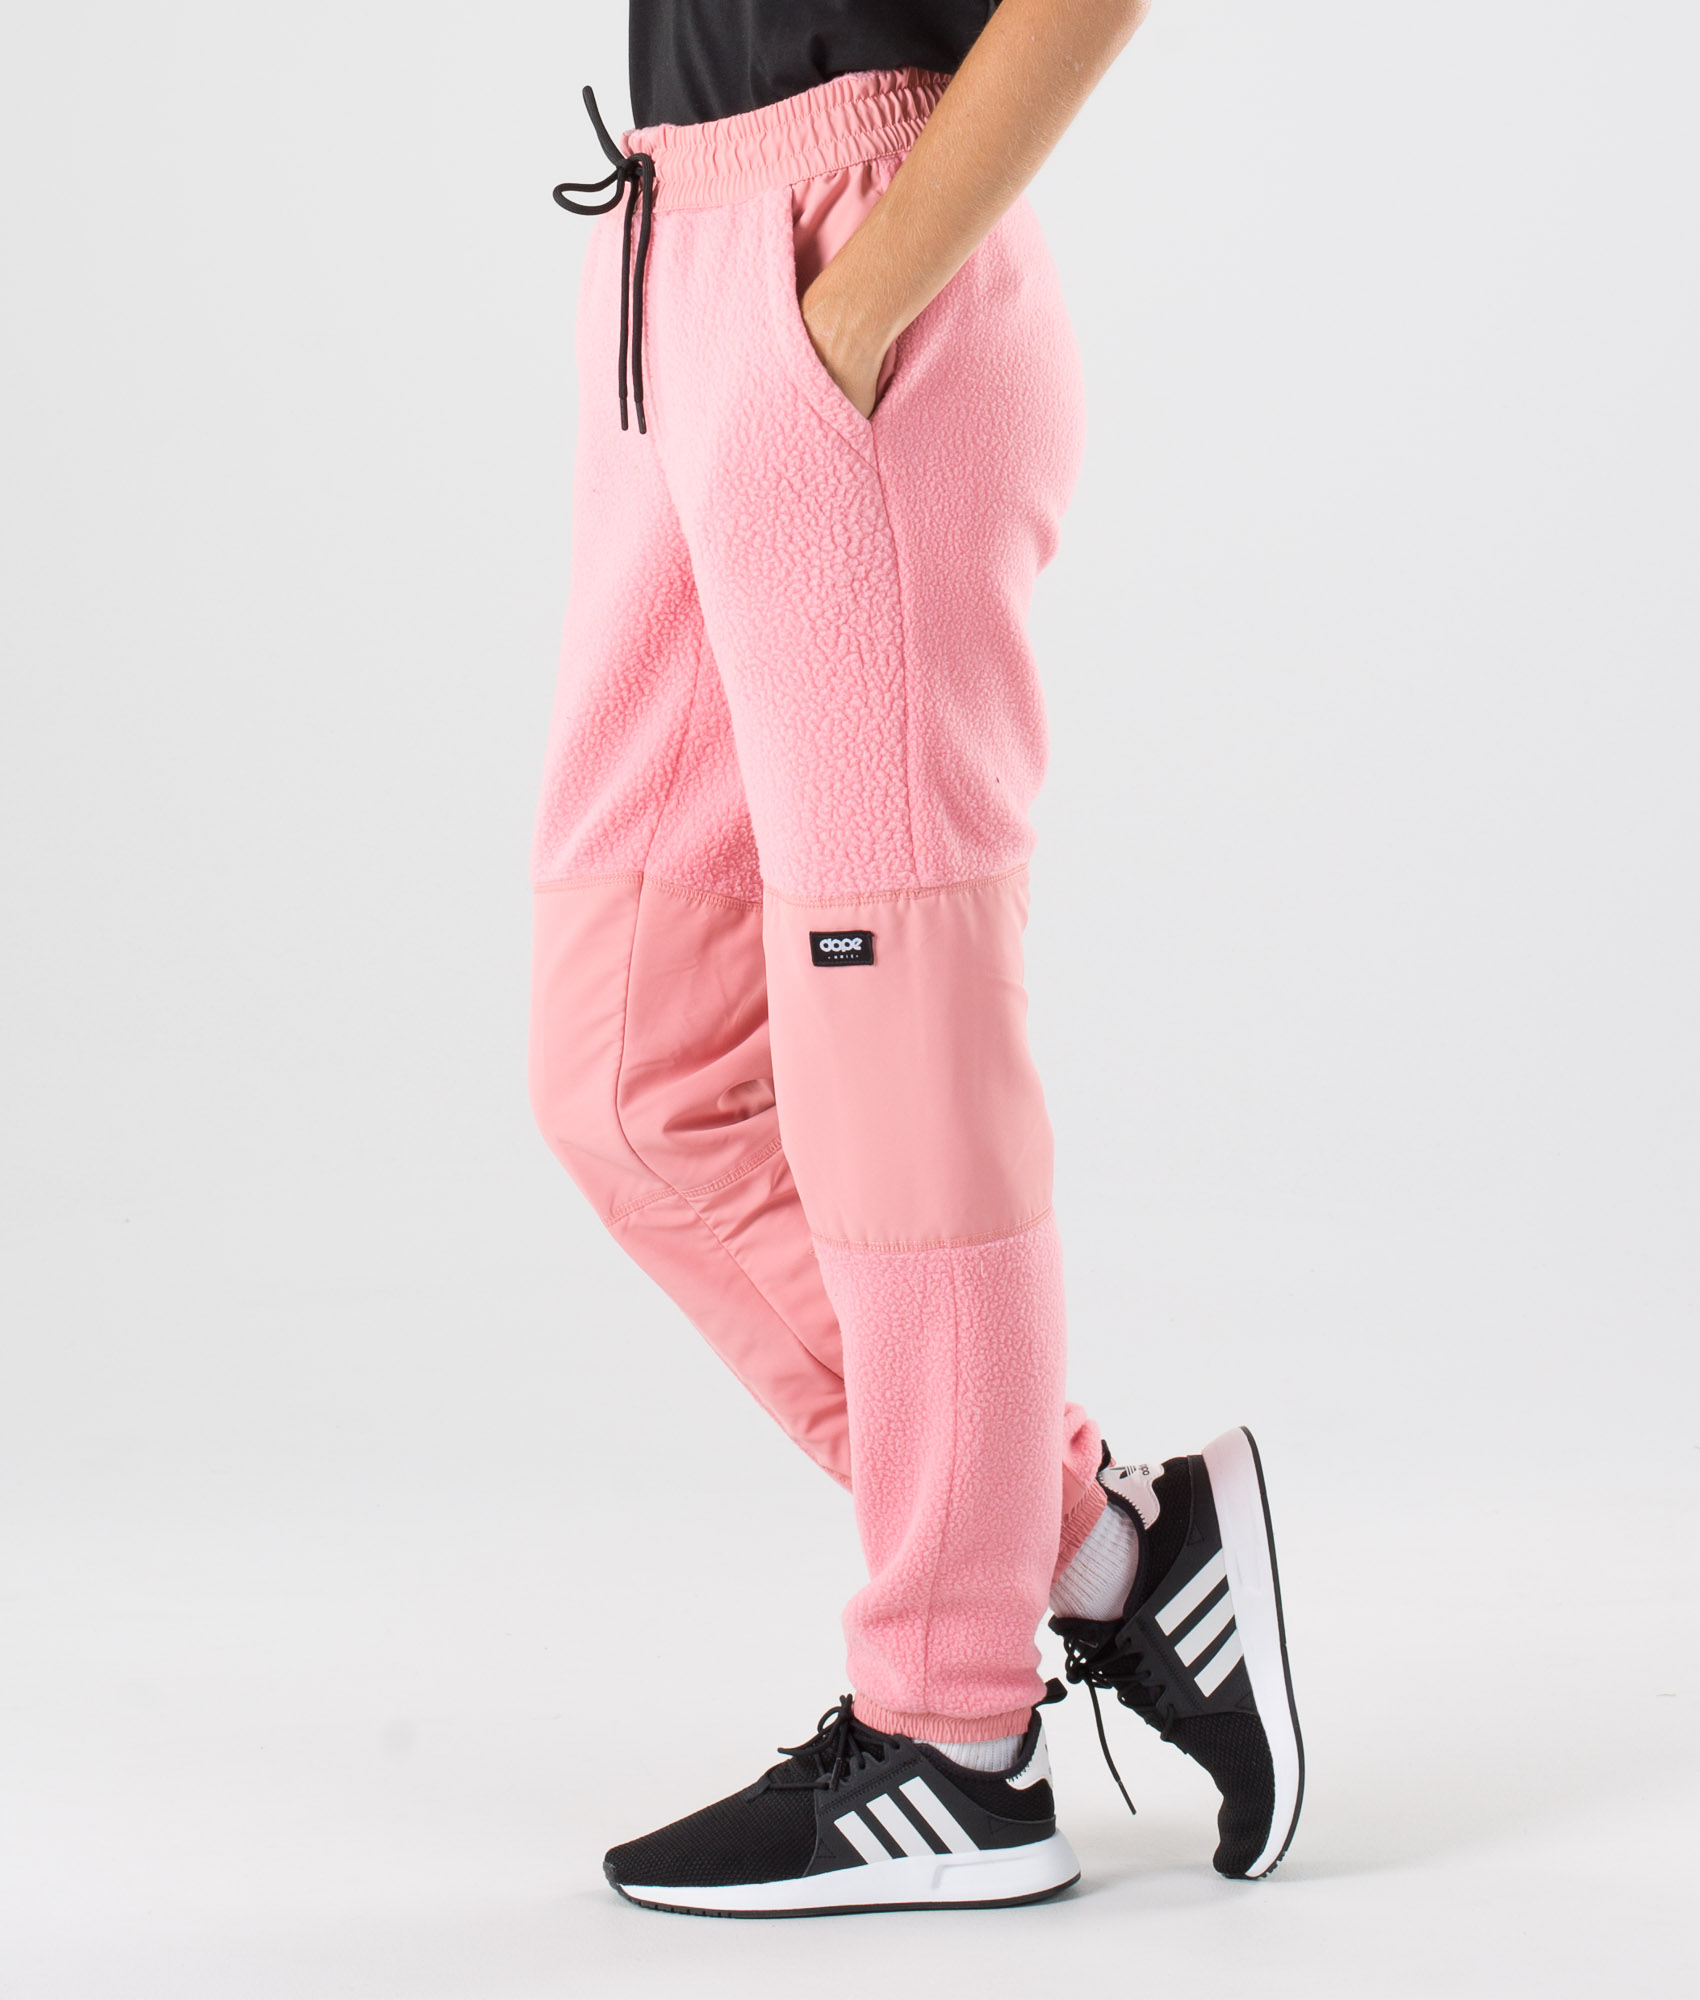 Asics Fleece Cuff Track Pant Womens - Buy Online - Ph: 1800-370-766 -  AfterPay & ZipPay Available!